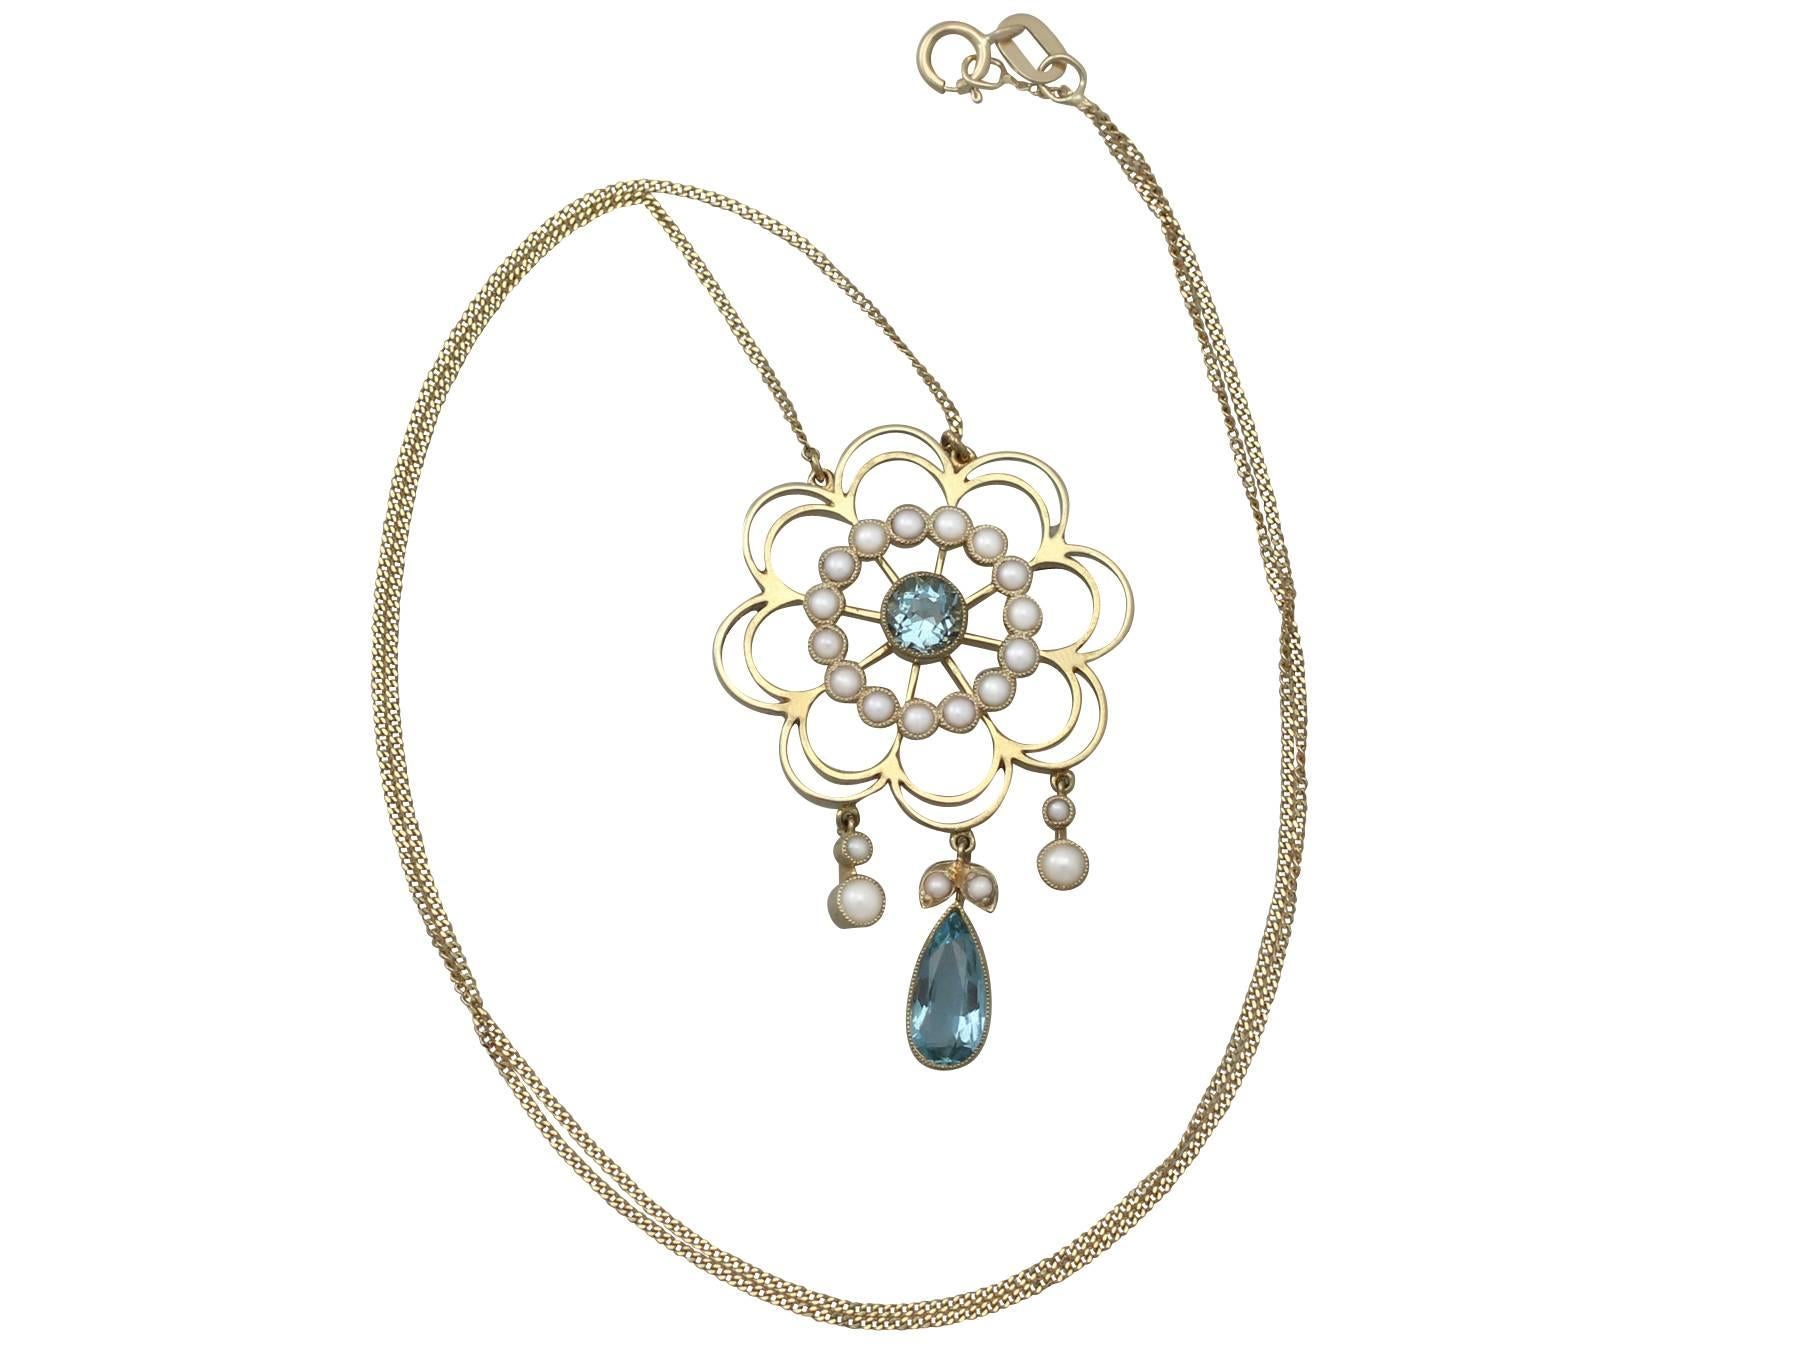 A stunning, fine and impressive antique 0.92 carat aquamarine and seed pearl pendant in 15 karat yellow gold; part of our diverse antique jewelry and estate jewelry collections

This stunning antique pearl and aquamarine pendant has been crafted in